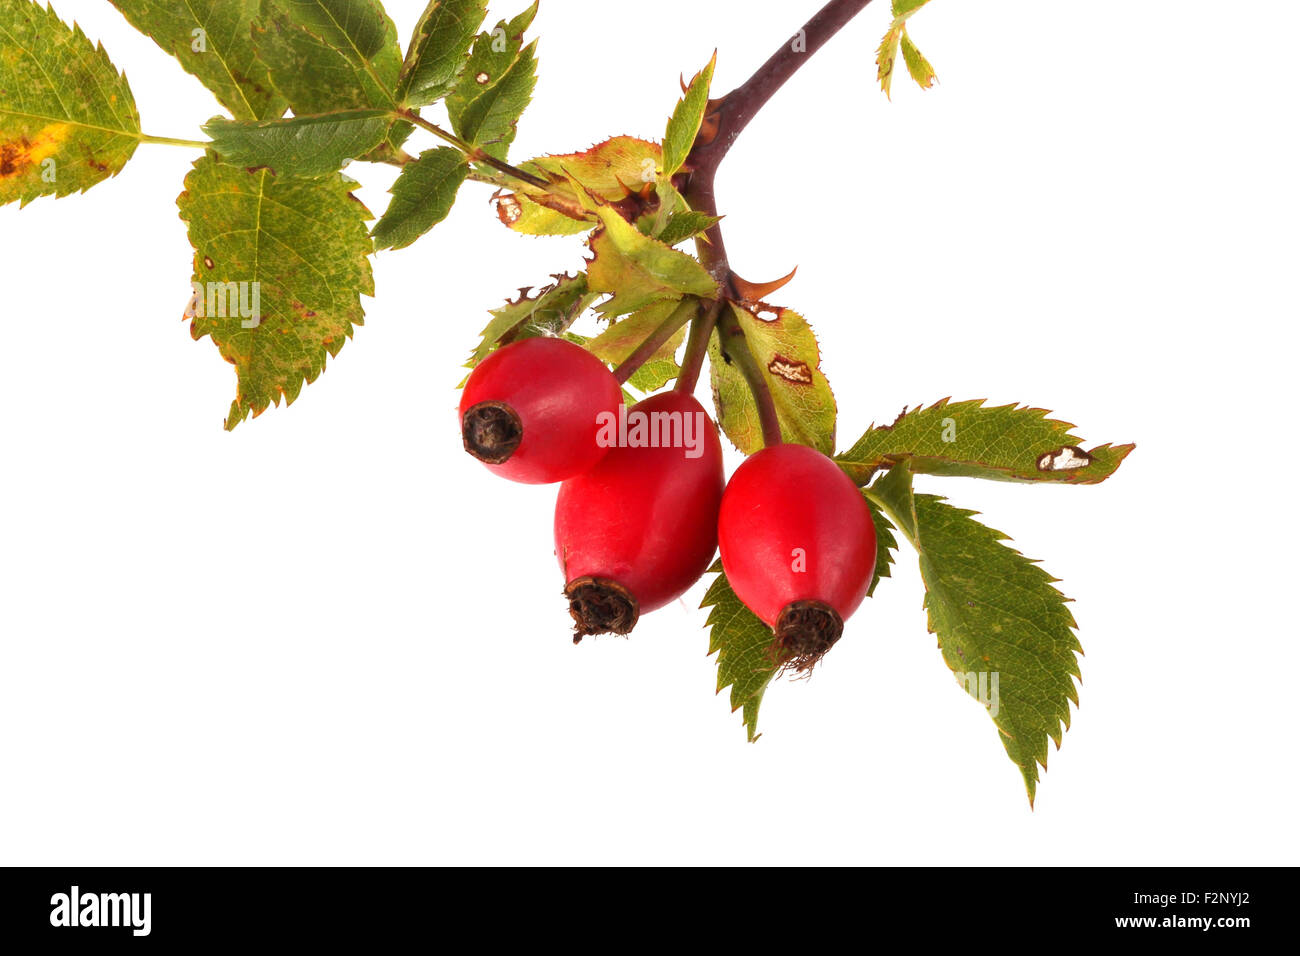 Three red rose hips and leaves on a plain white background. Stock Photo